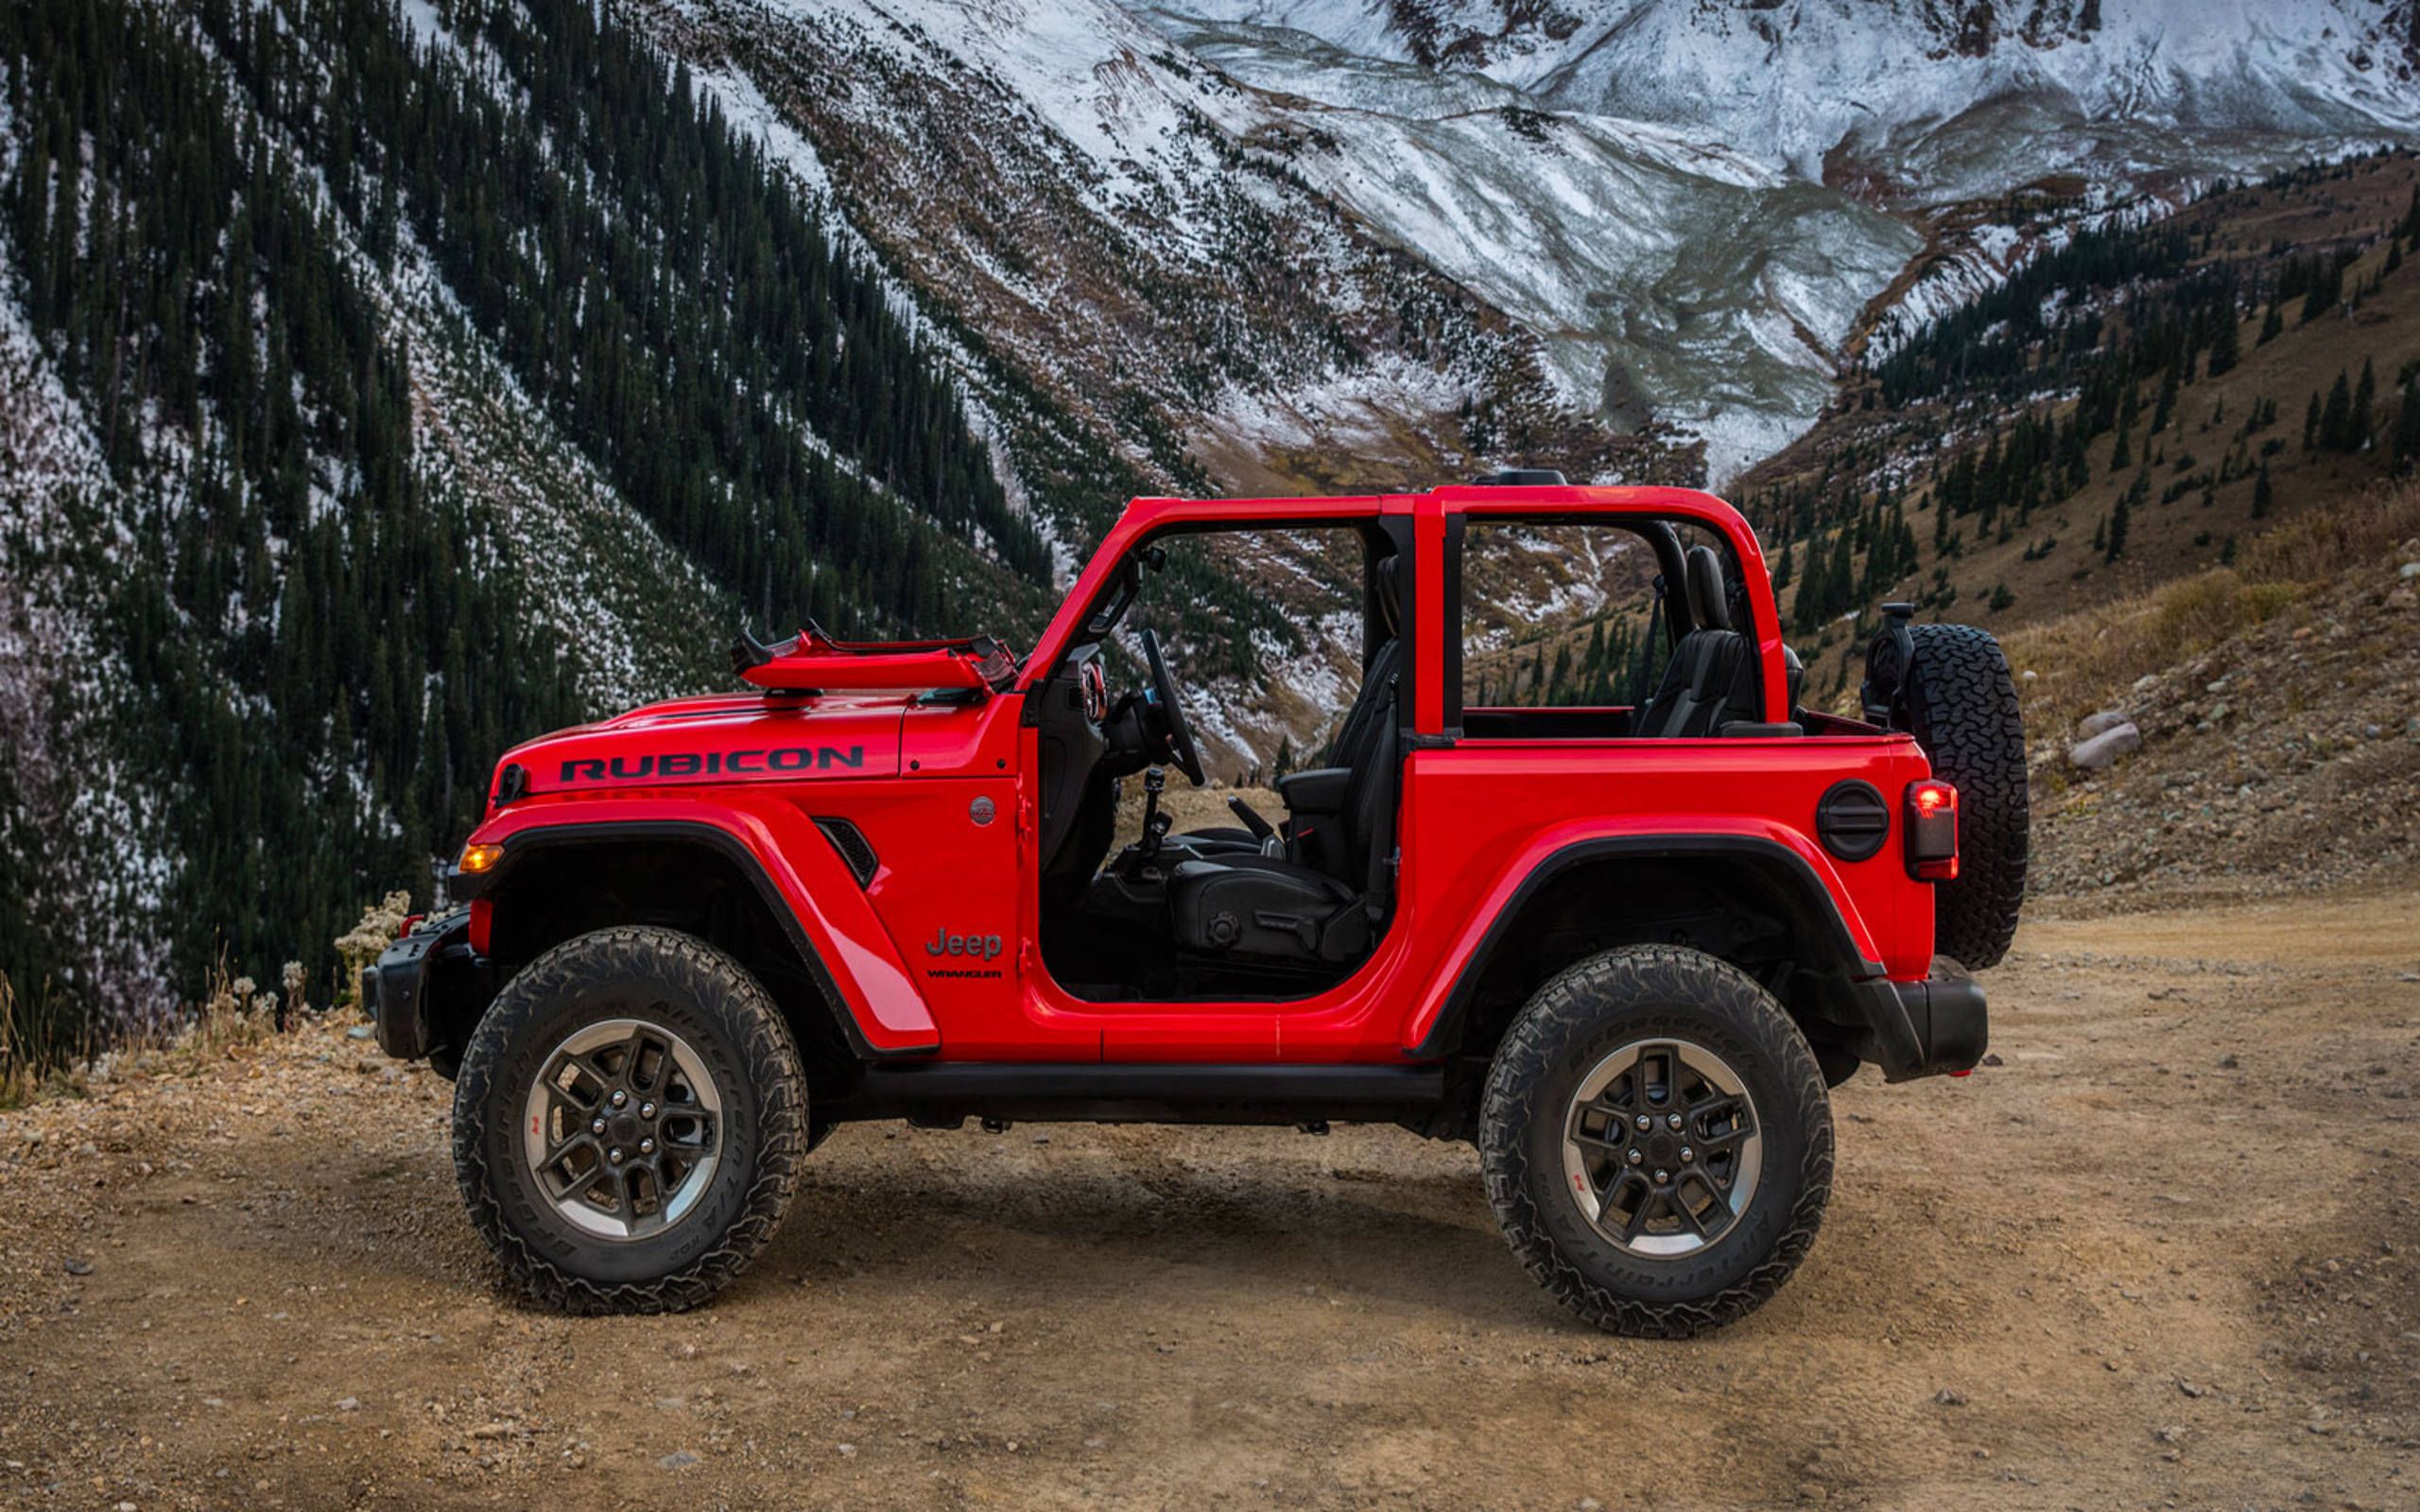 Jeep shows the new Wrangler at SEMA, sort of